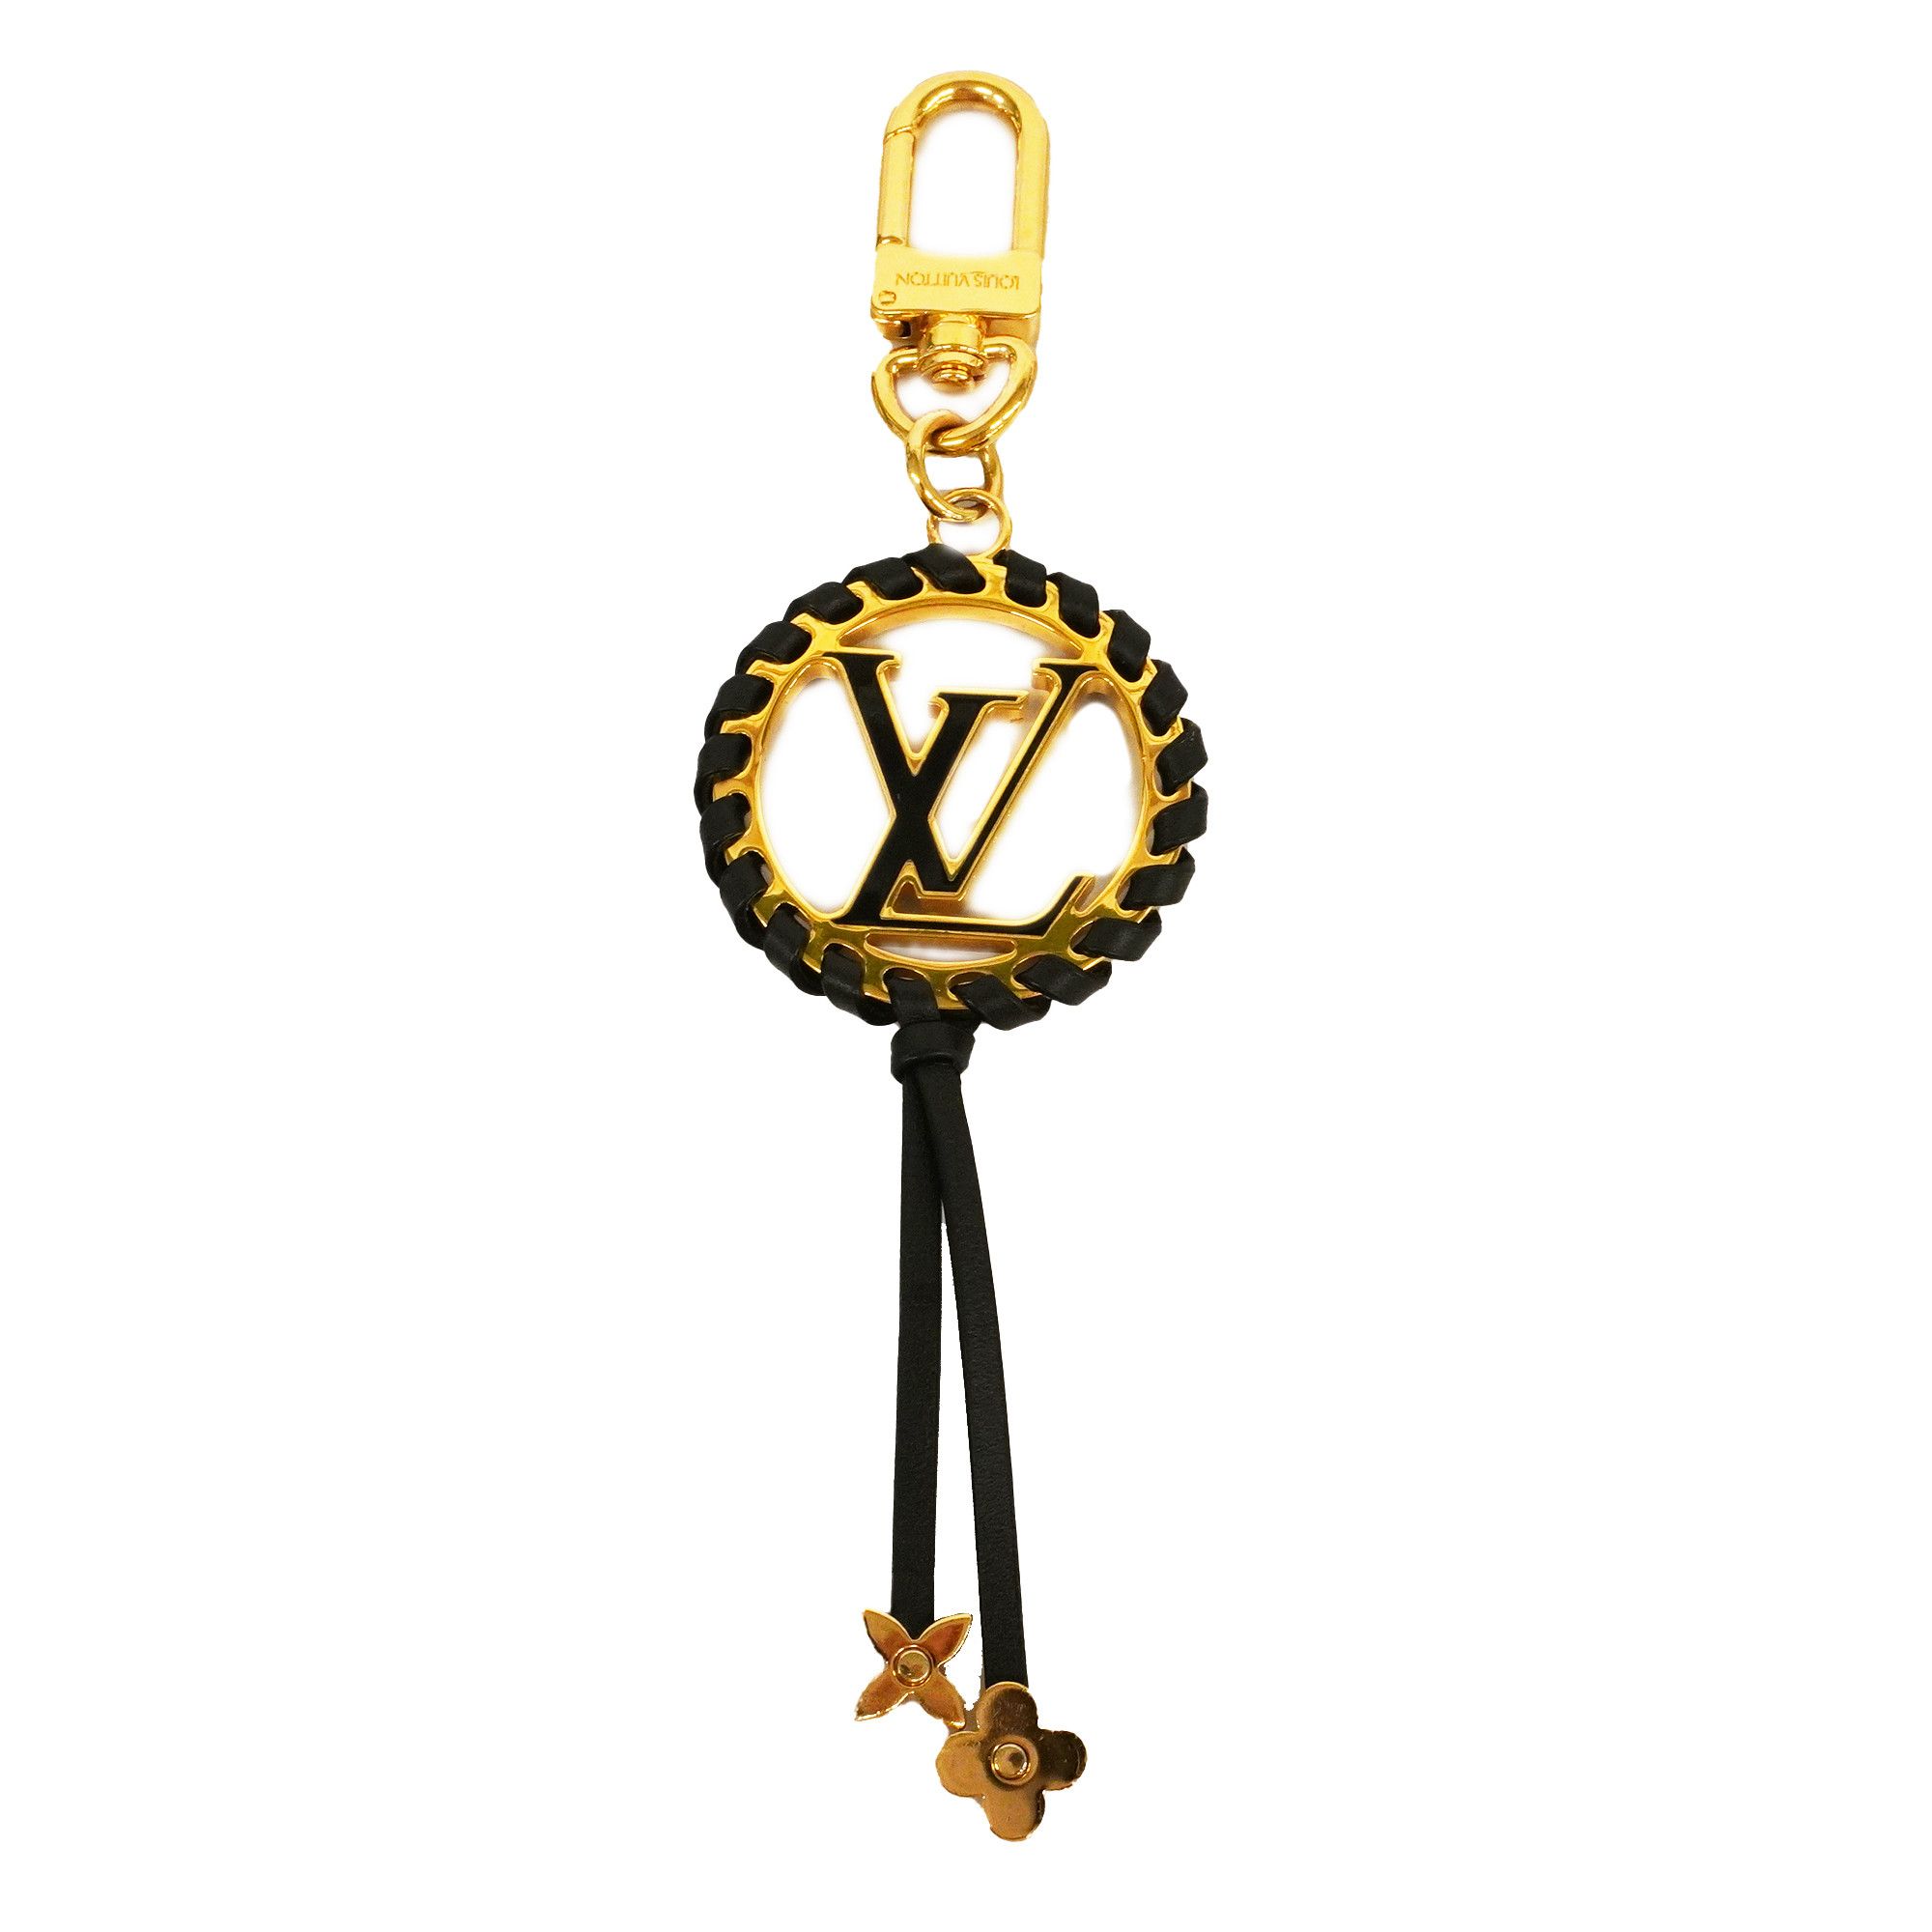 Auth LOUIS VUITTON Portocre Neo LV Club Key Ring Keychain bag